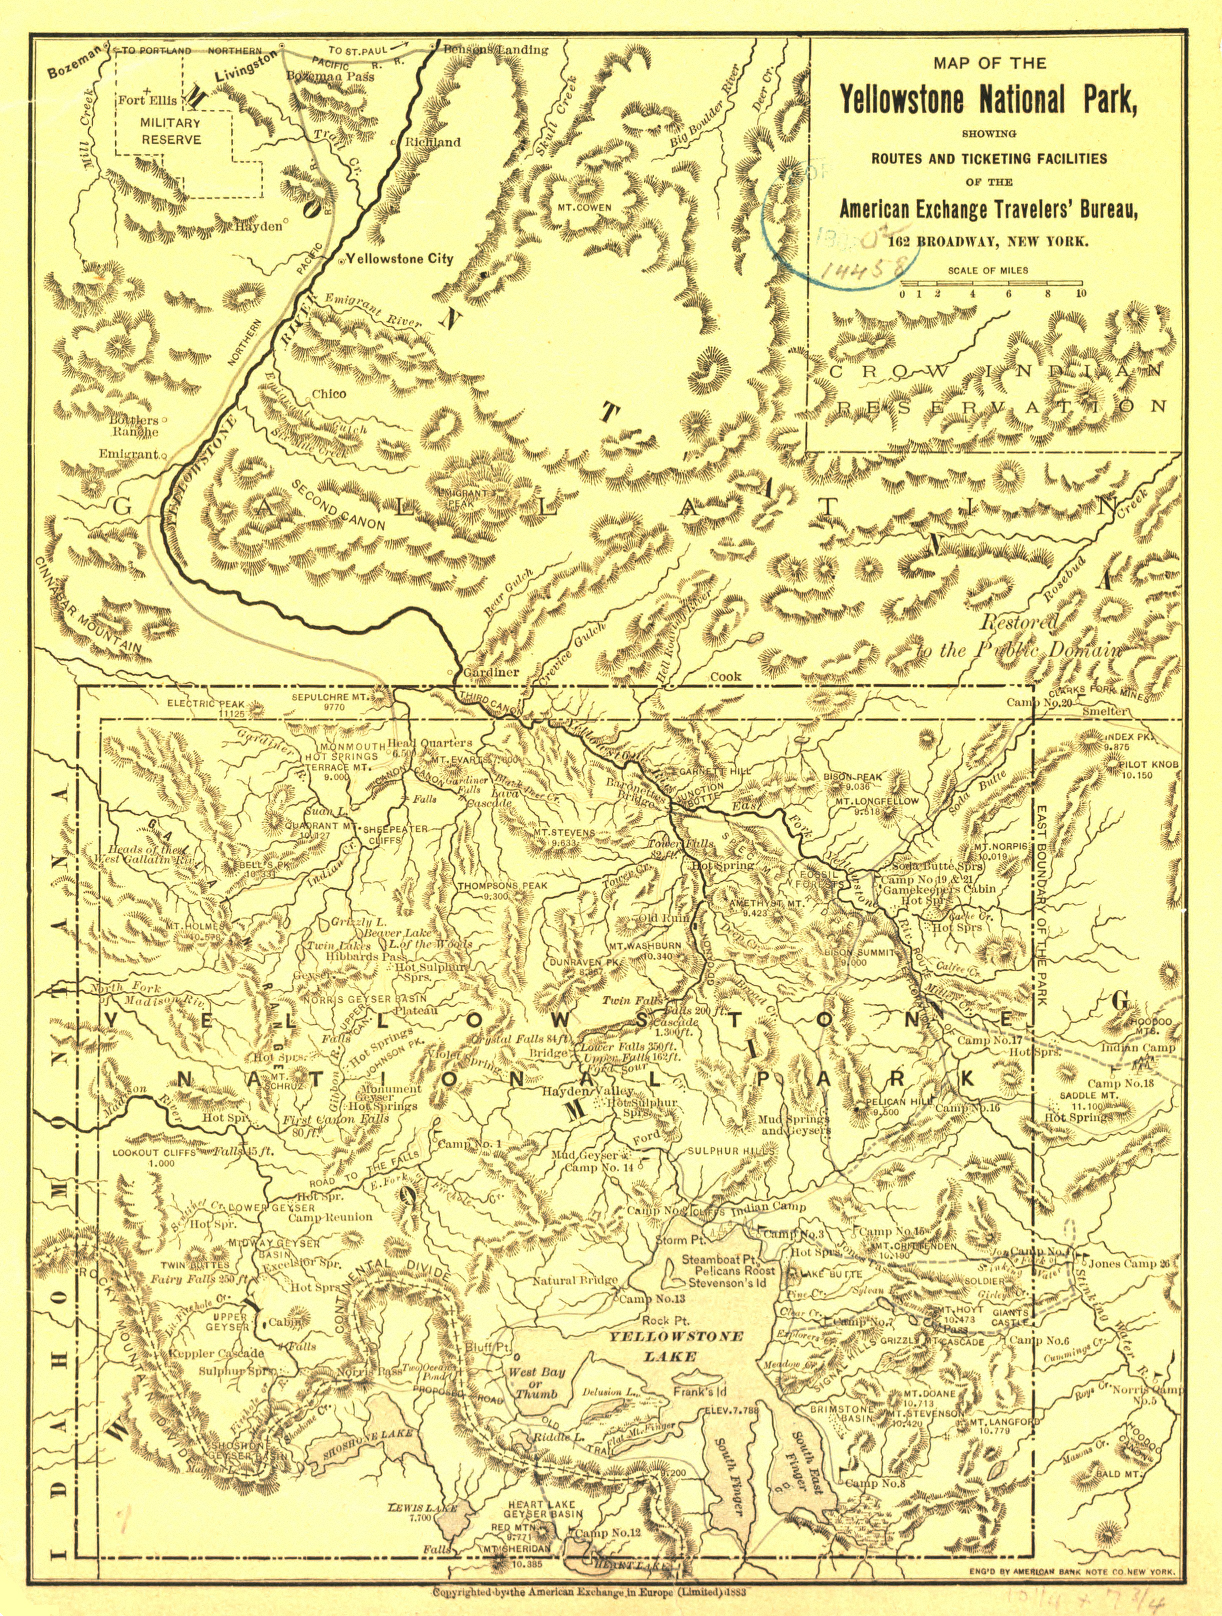 Yellowstone National Park 1883 American Exchange Travelers' Map from the Library of Congress Collection